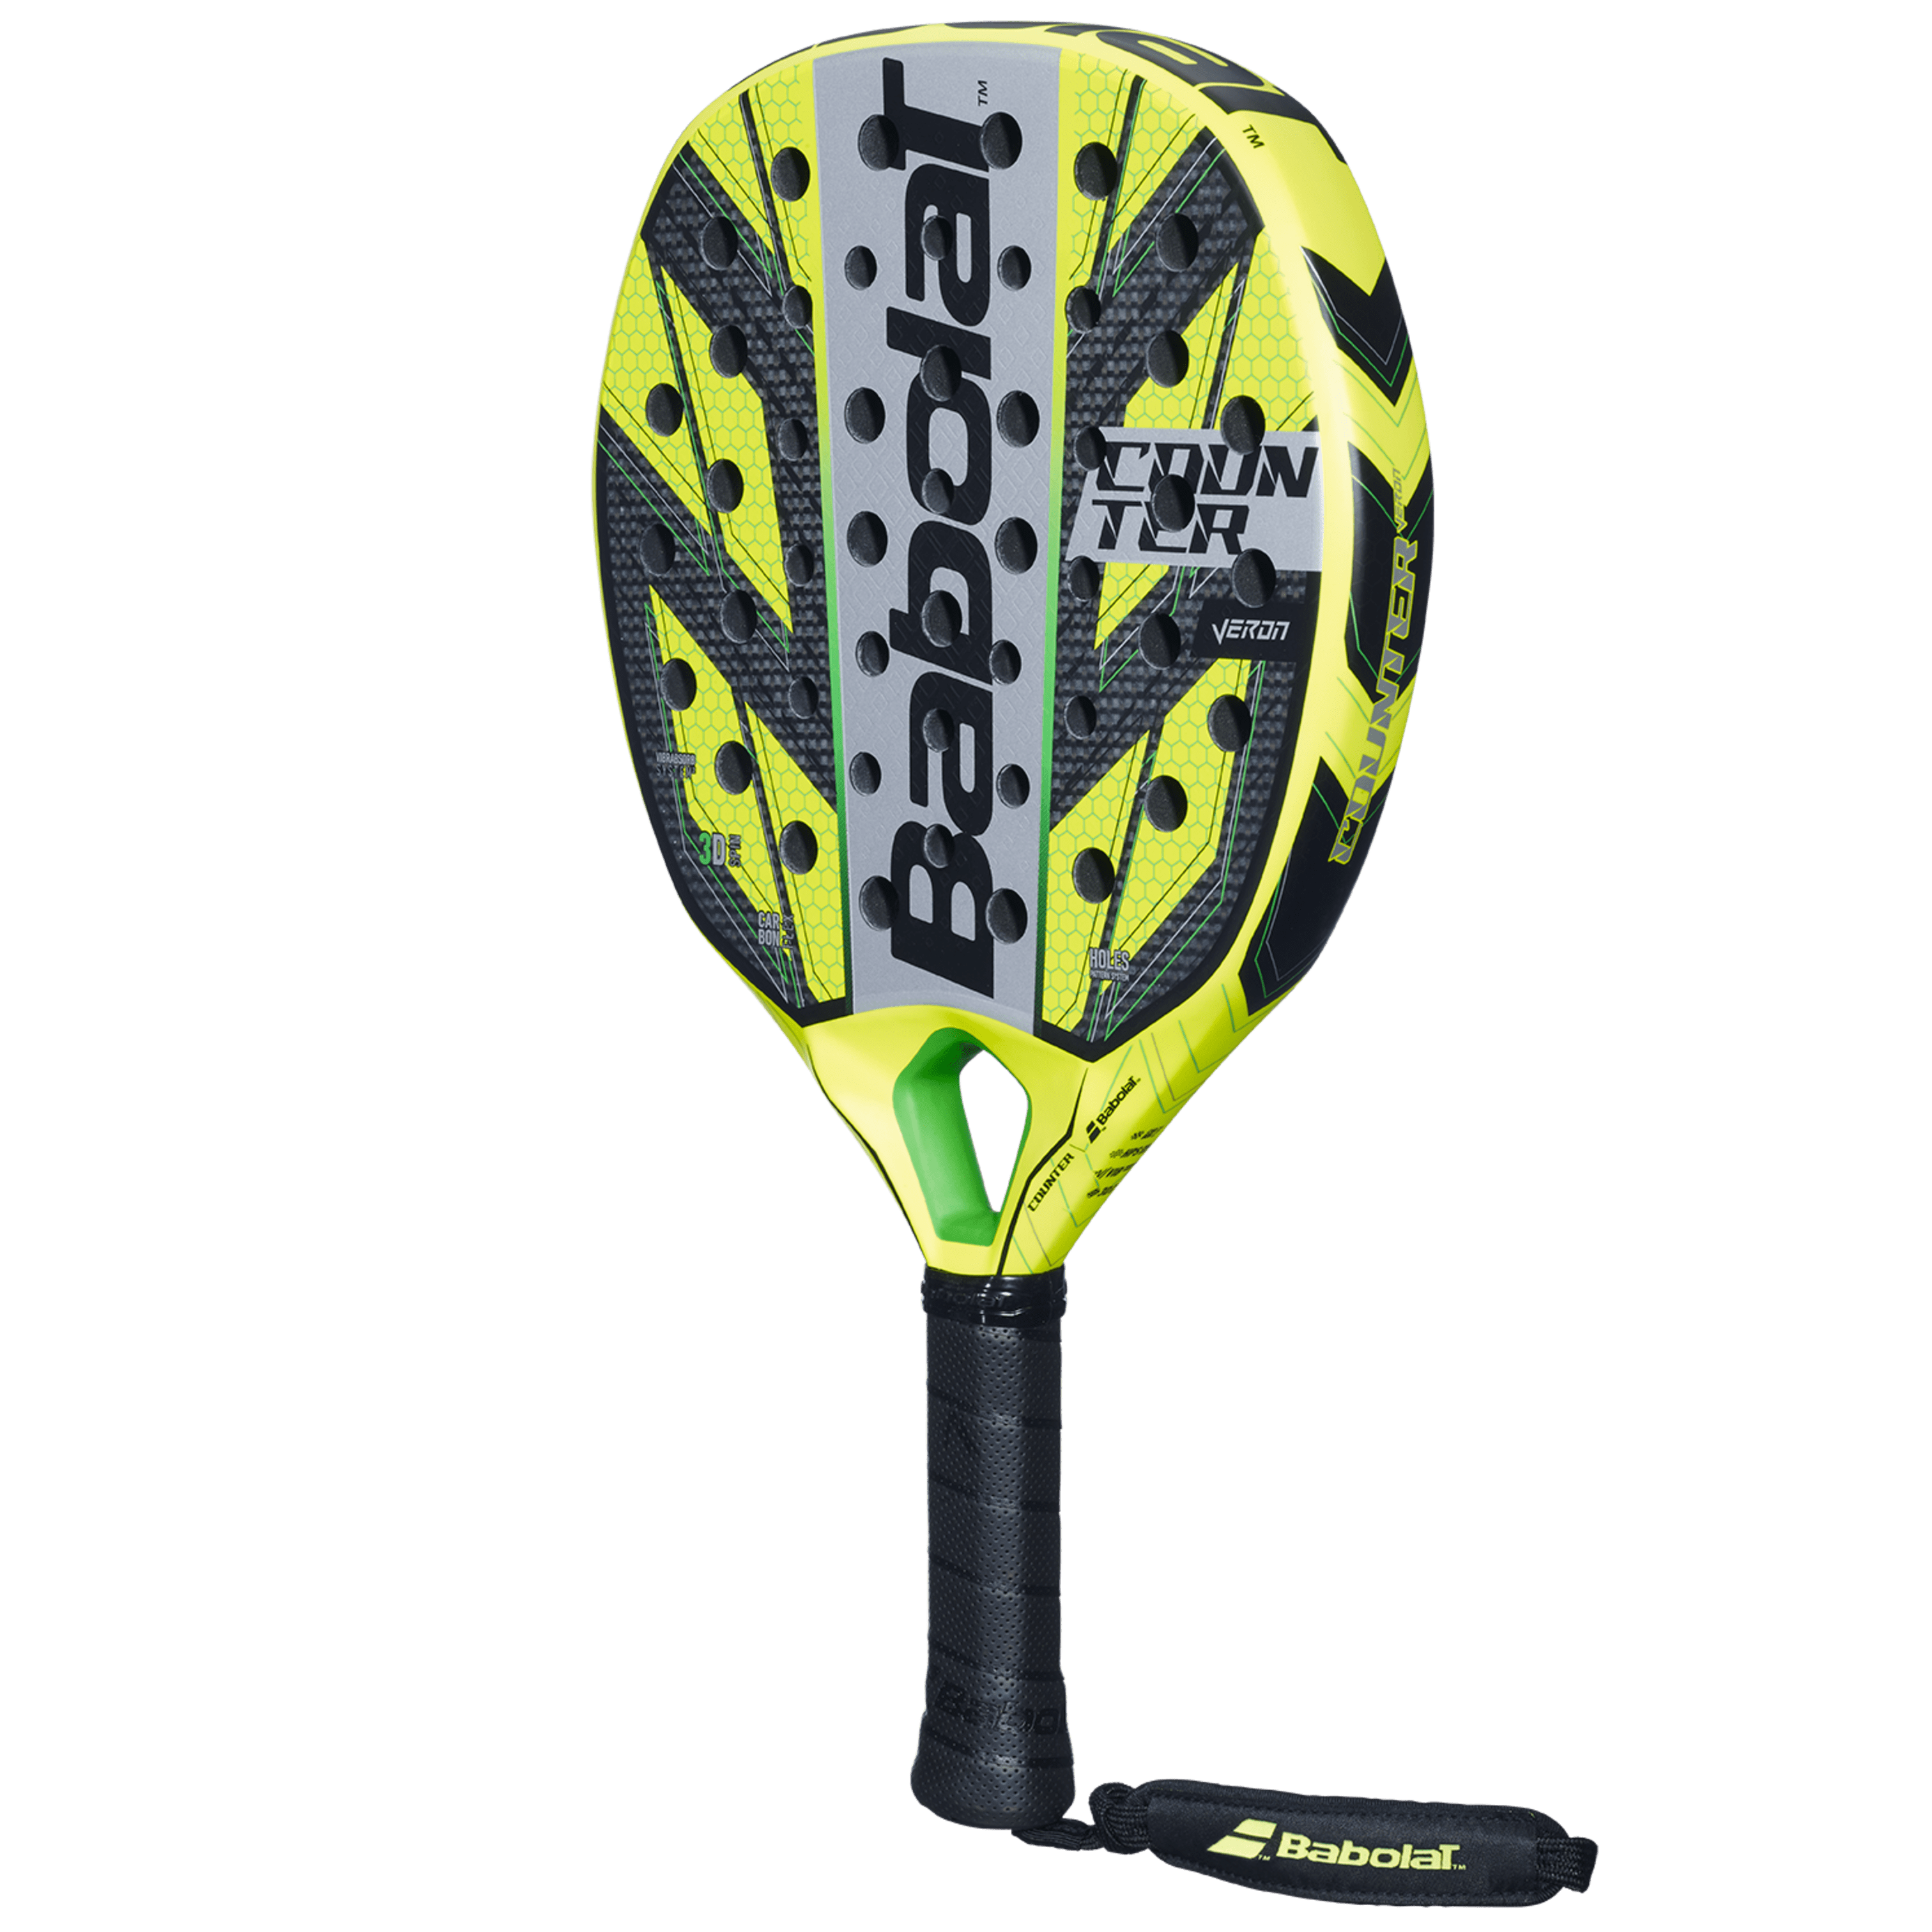 Babolat Counter Veron Padel Racket with its 3D Spin feature for enhanced gameplay.